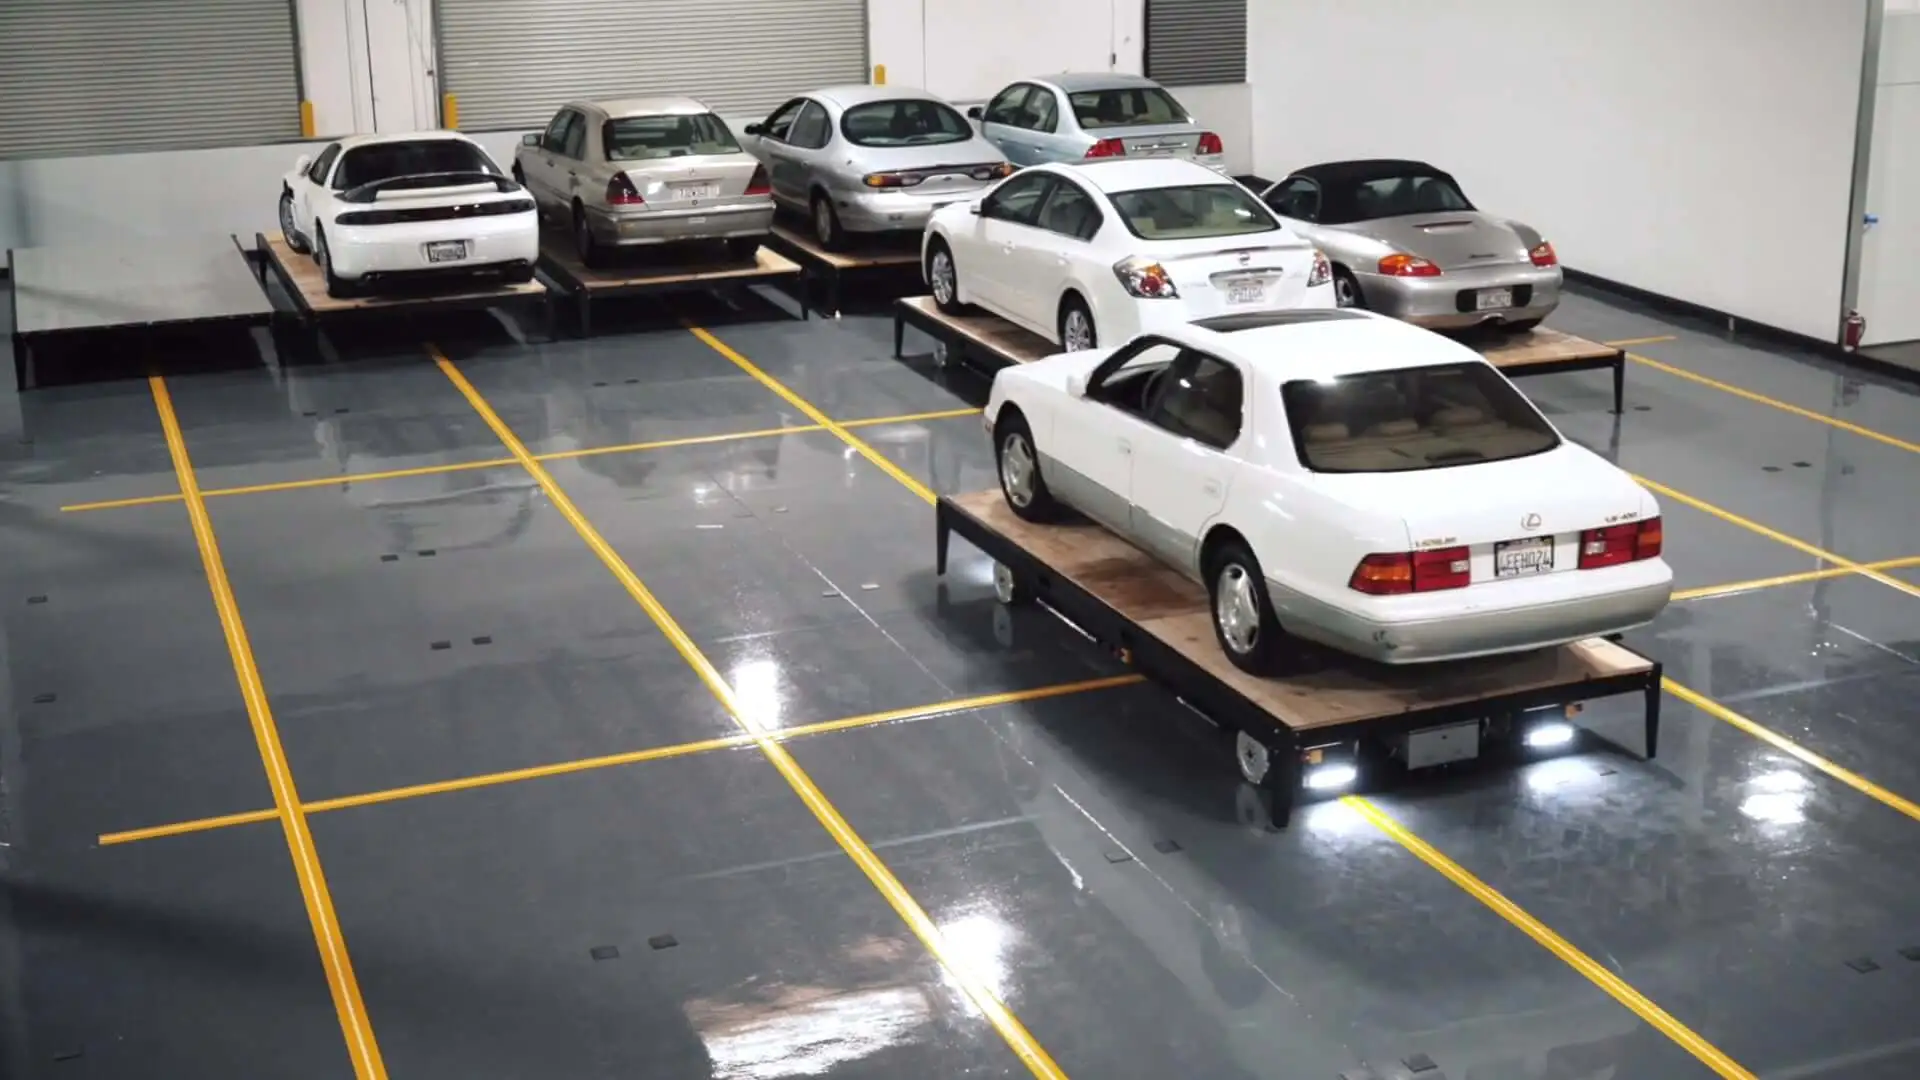 A white car mounted on a wooden platform with wheels in a spacious indoor parking lot, surrounded by other parked cars, with visible floor markings used by robots for navigation. A mobile robot is visible underneath the closest white car, driving the car to its parking spot